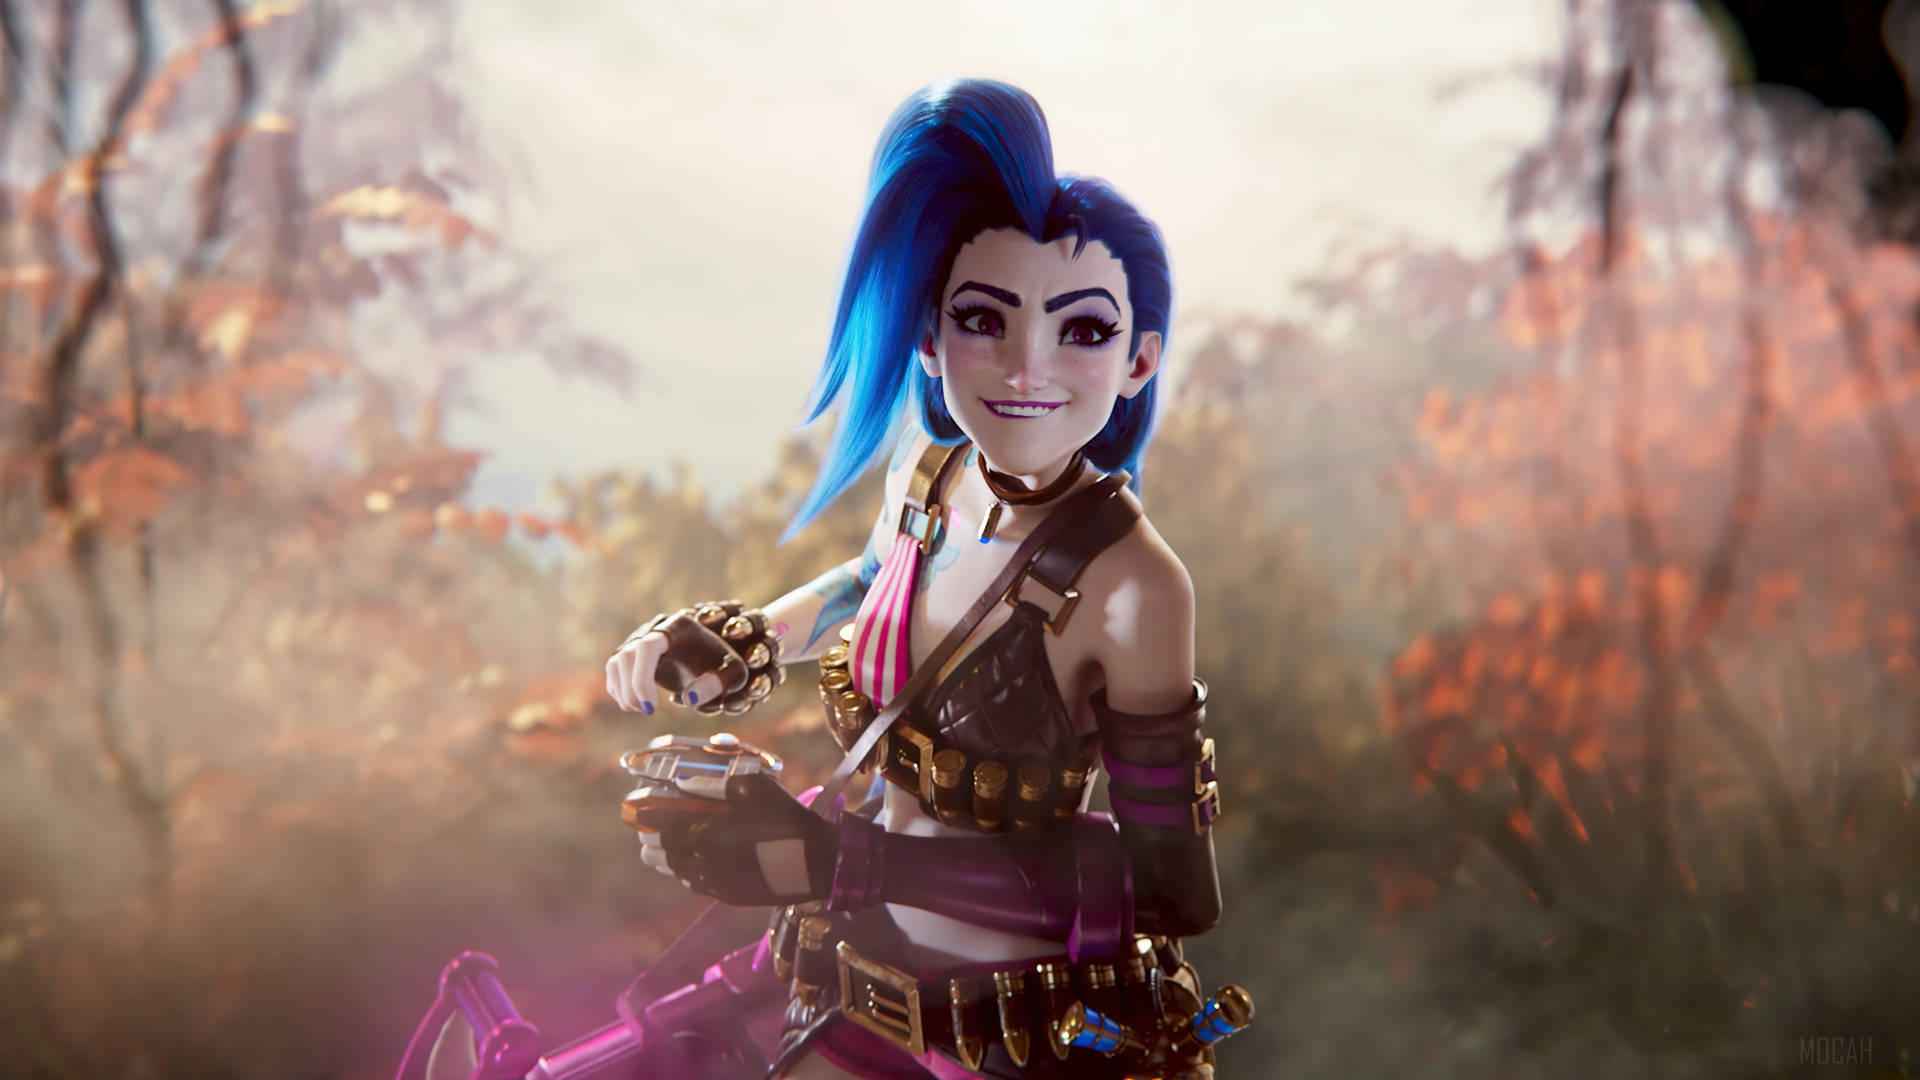 Excited Jinx In The Forest Wallpaper